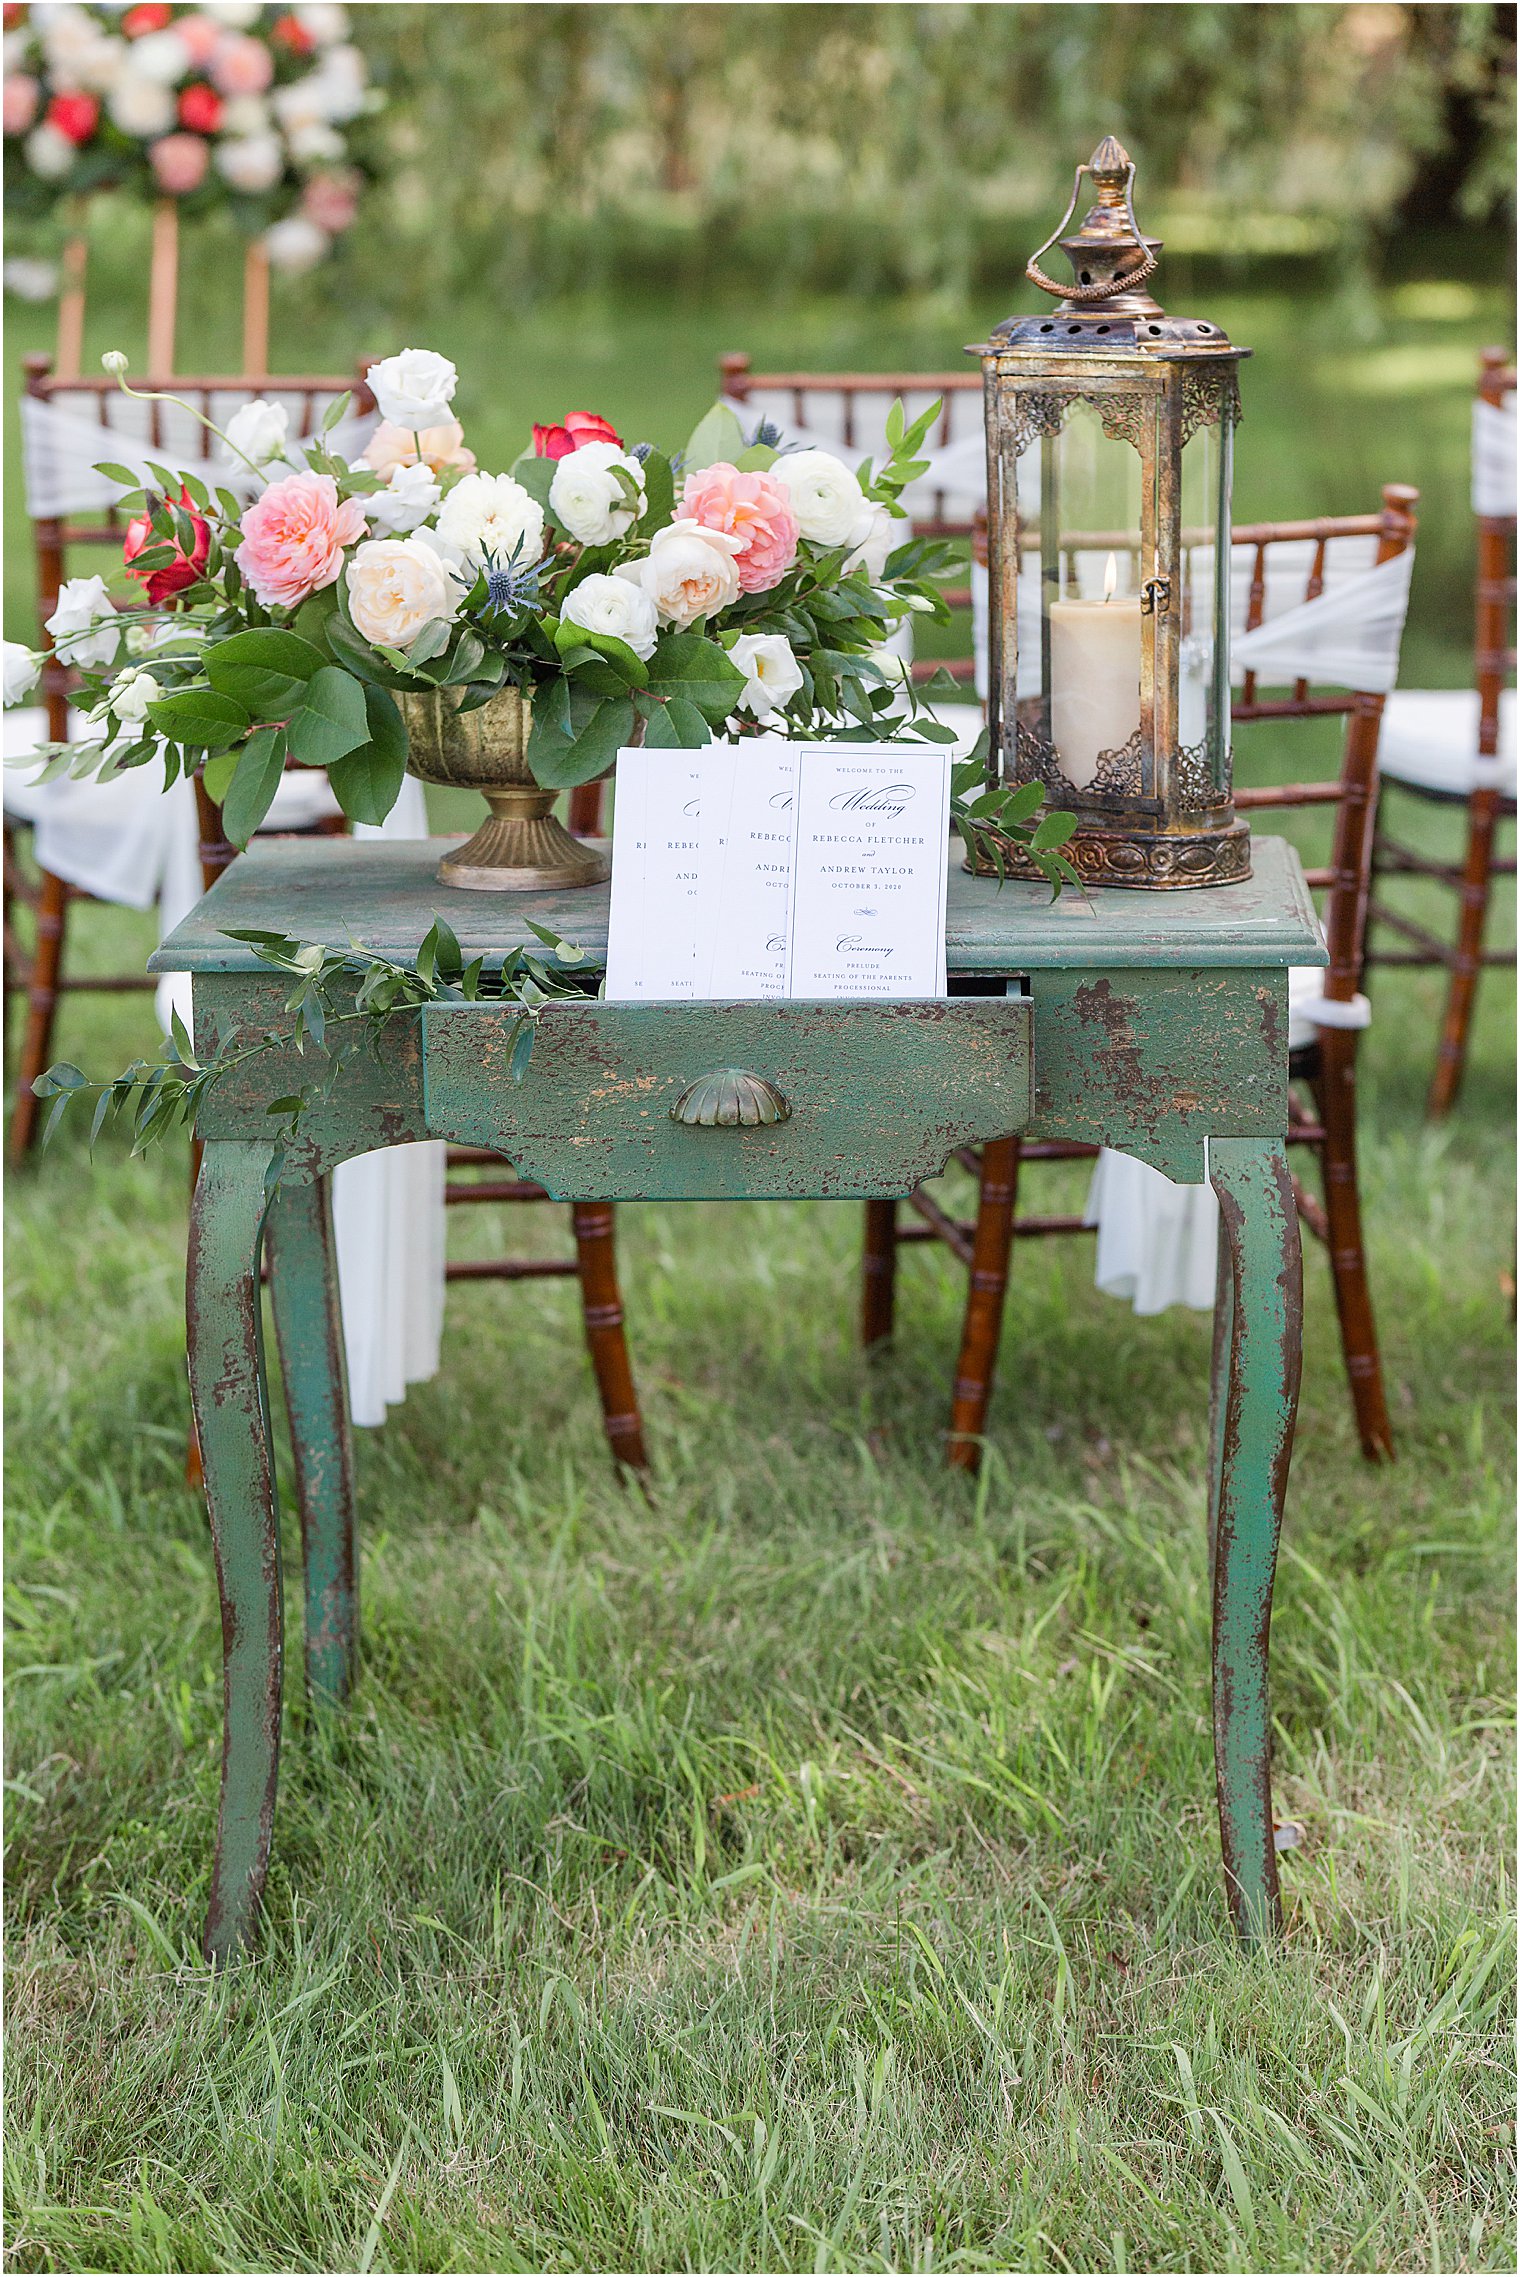 wedding programs on antiqued table with flowers